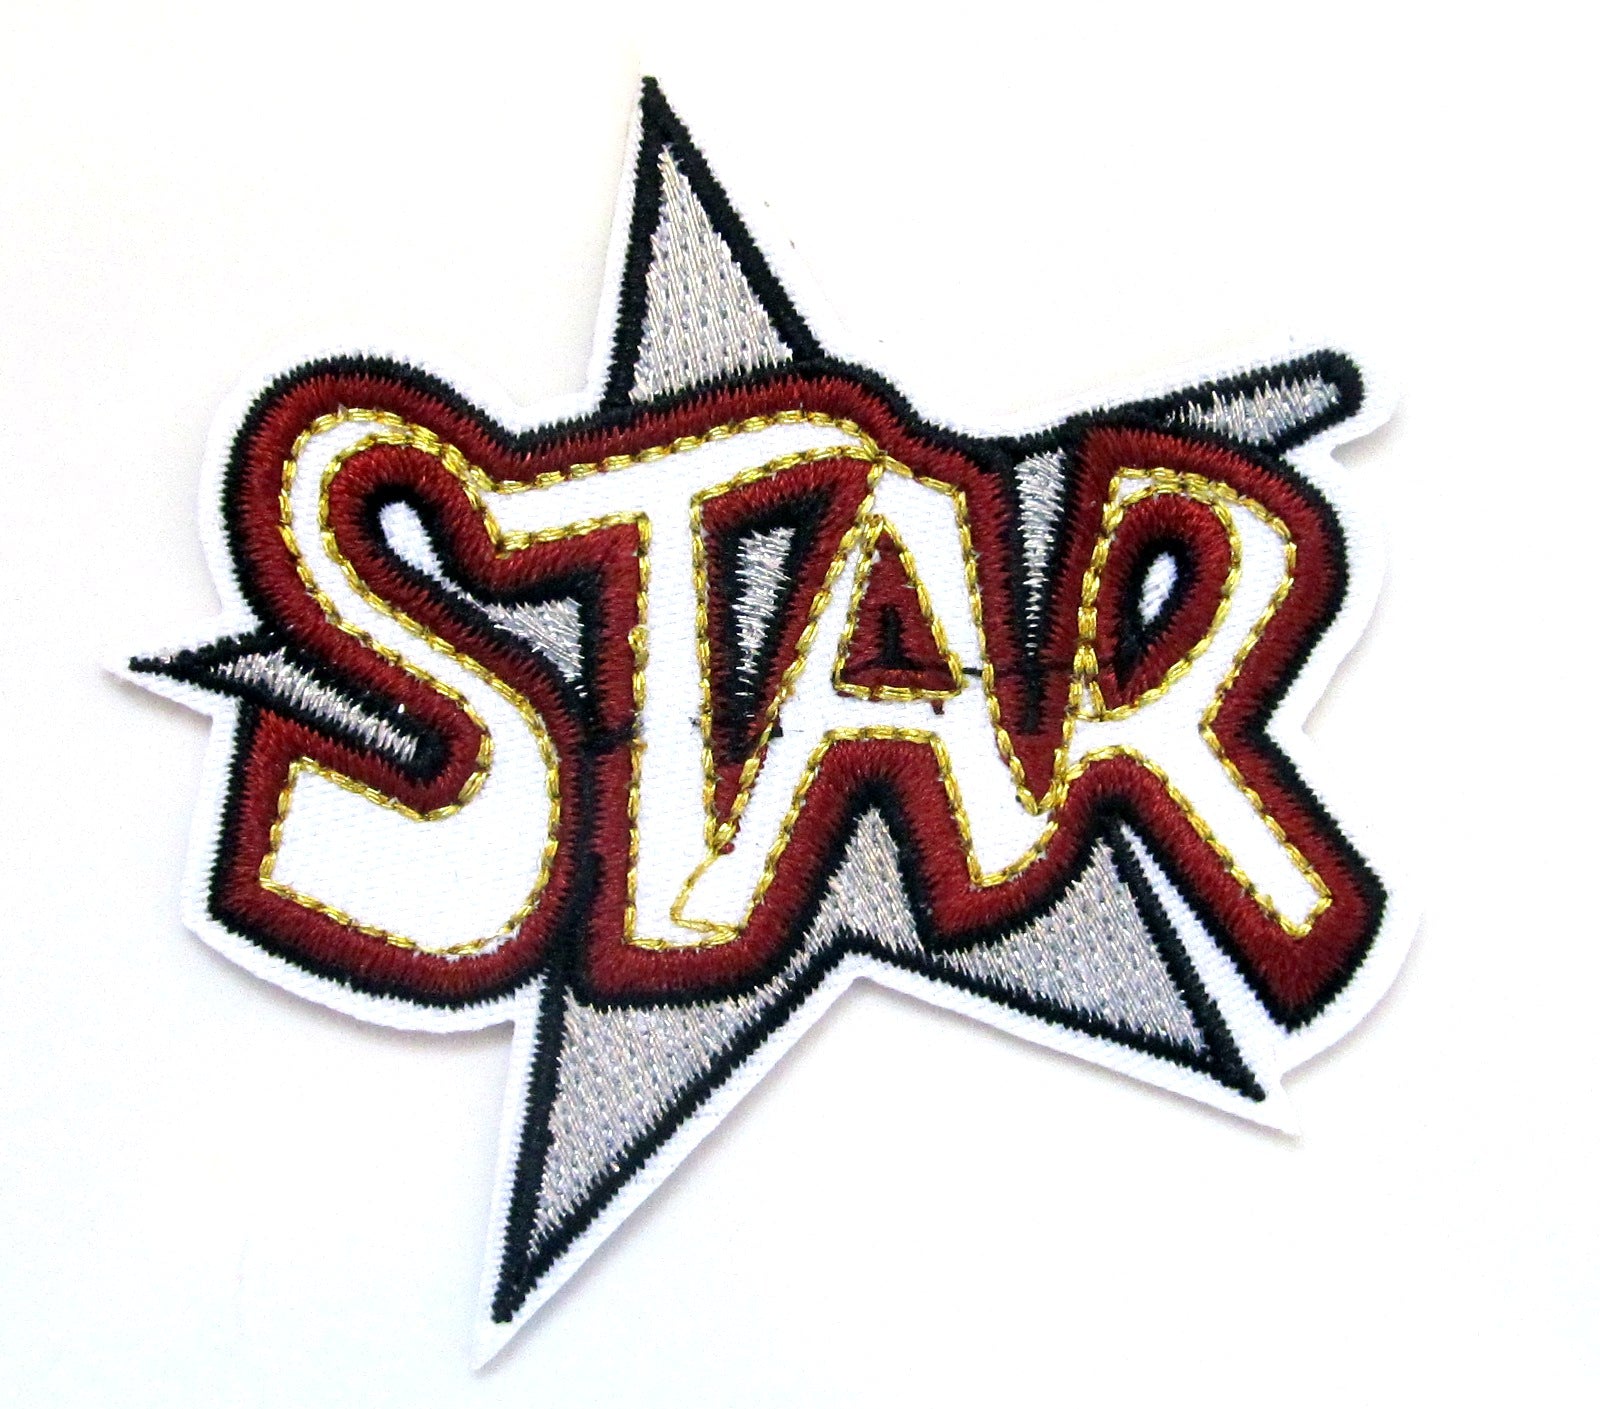 X1zuue 30Pcs Iron on Patches, Kids Cartoon Monster Patches Iron on Knee  Patches Colorful Star Embroidered Patches Sew on Embroidered Applique DIY